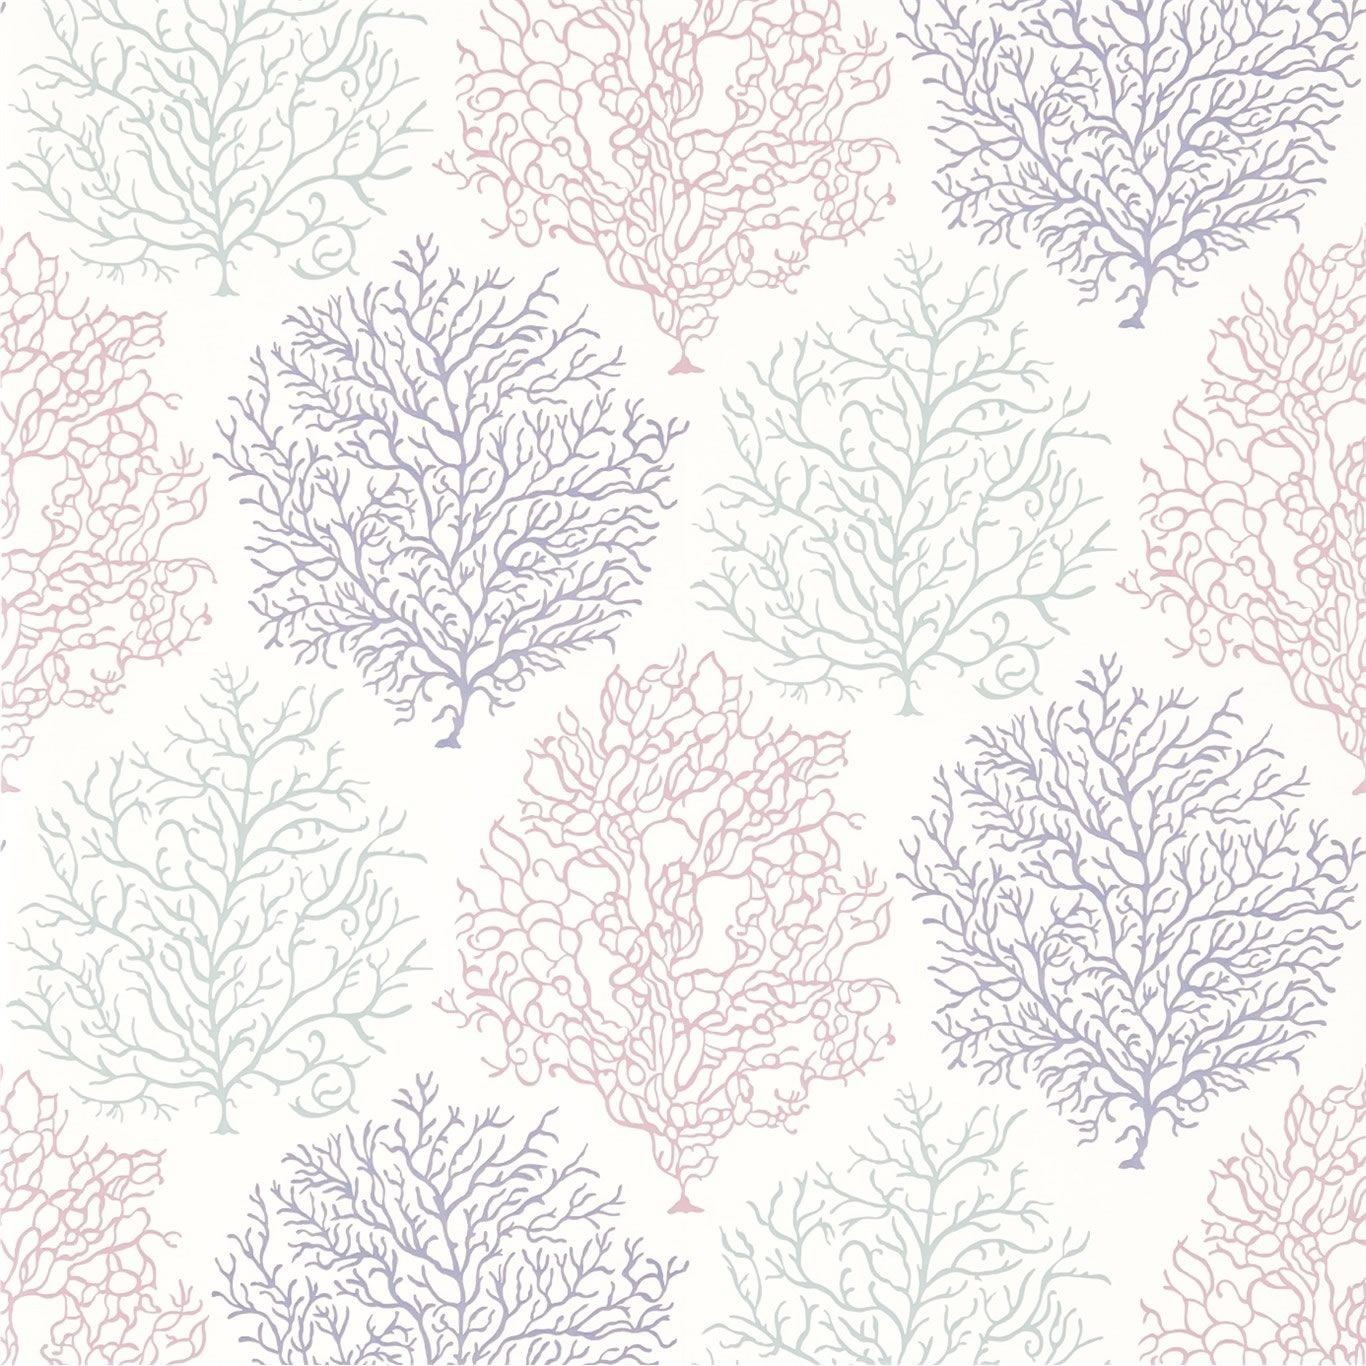 Decor Supplies | Teal / Mauve - 213392 - Coral Reef - Voyage of ...